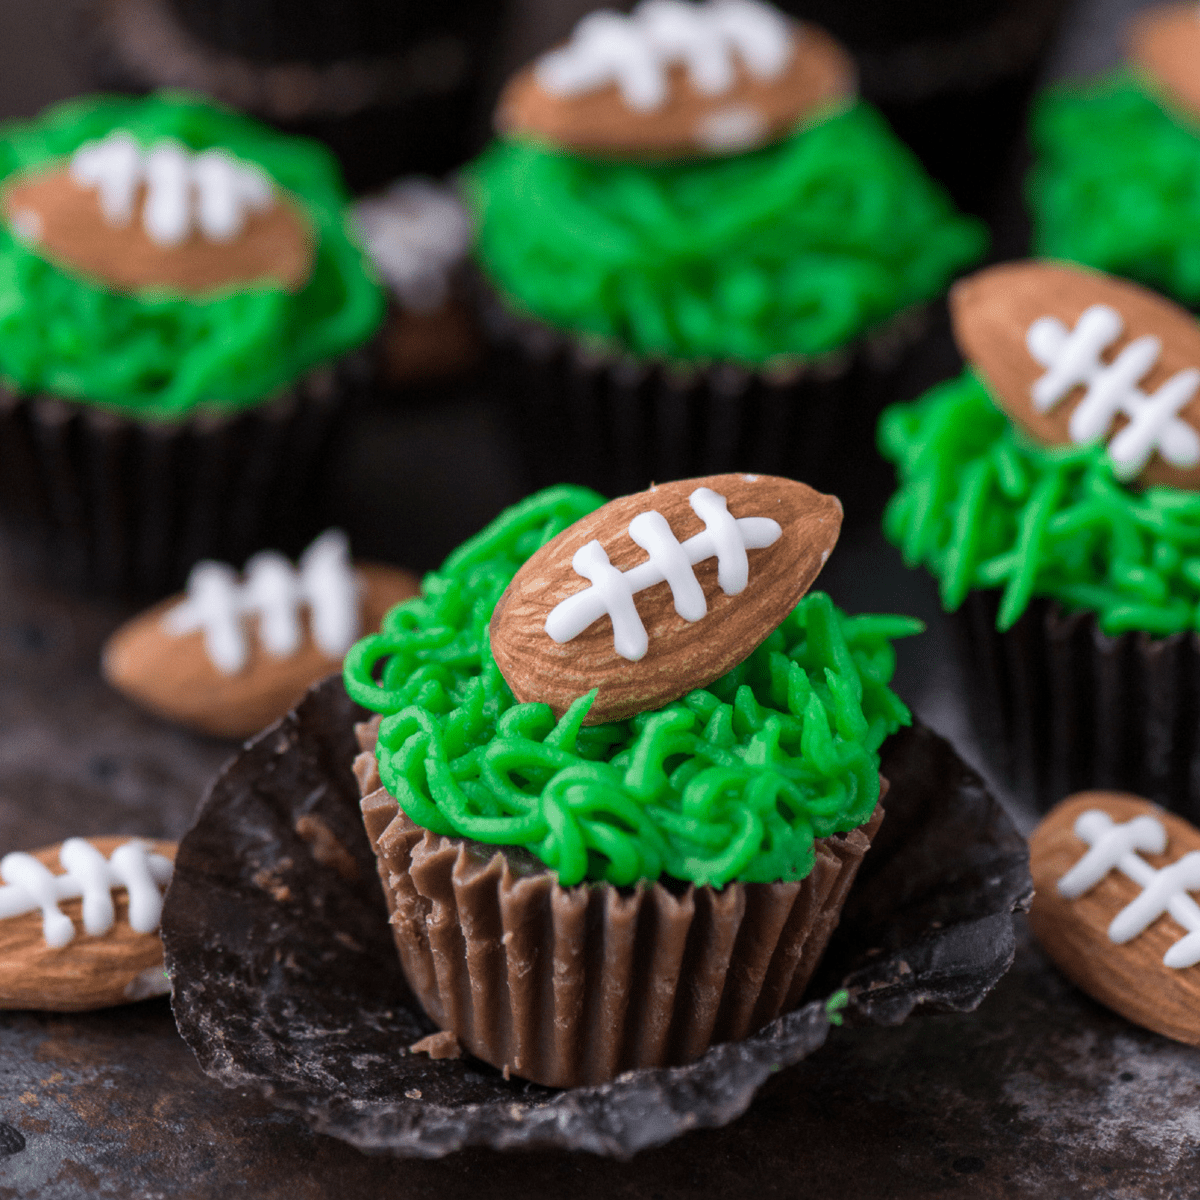 Let’s Go Eagles Cupcakes!